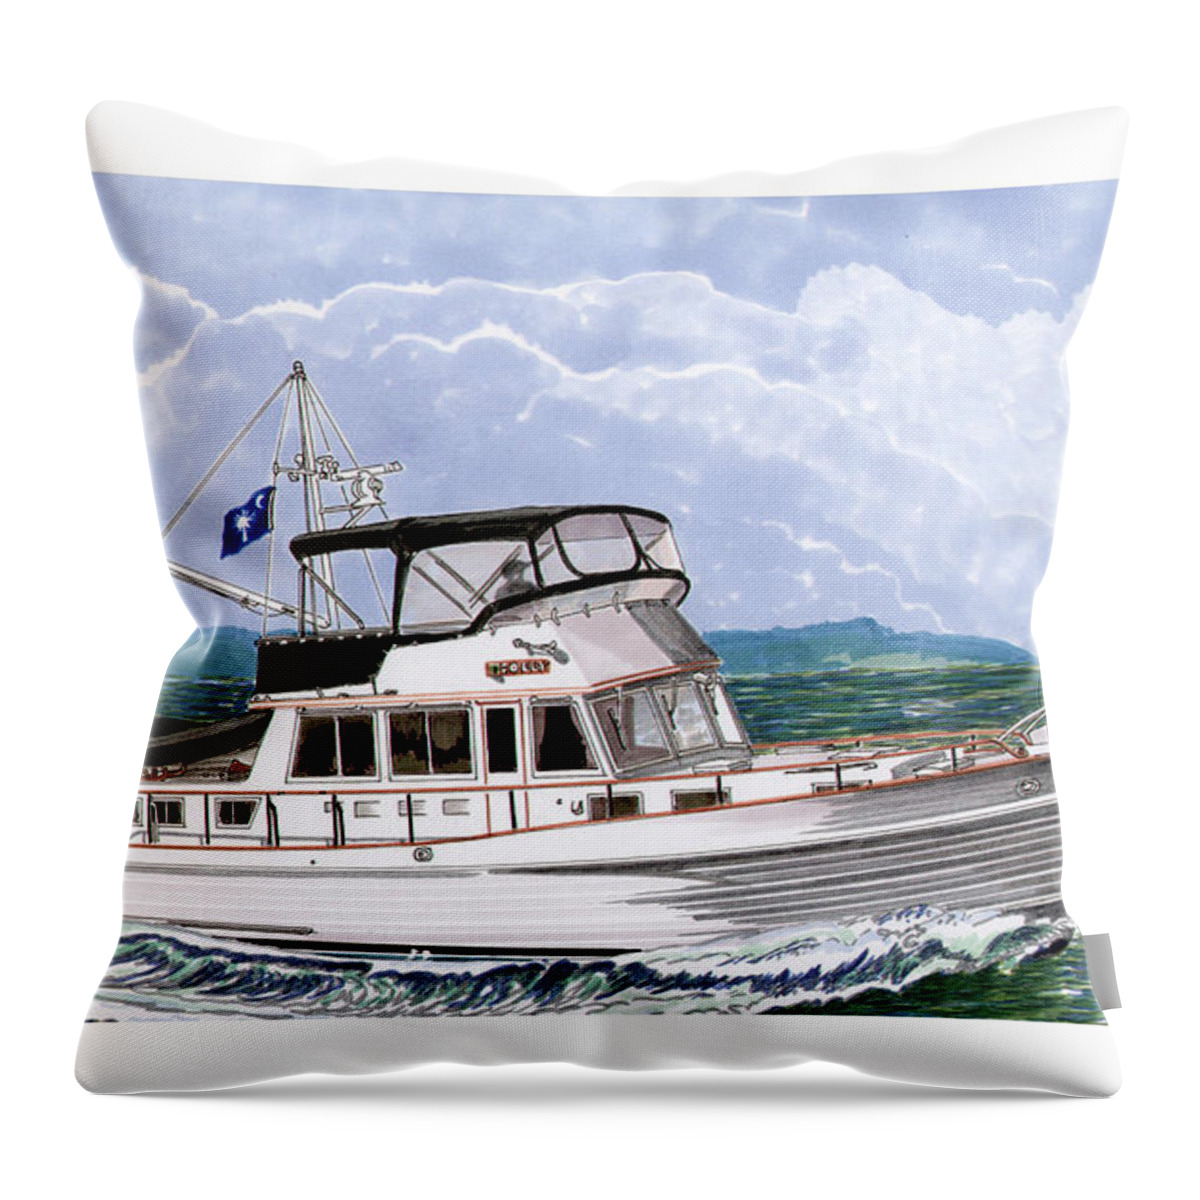 Yacht Portraits Throw Pillow featuring the painting 42 Foot Grand Banks Motoryacht by Jack Pumphrey